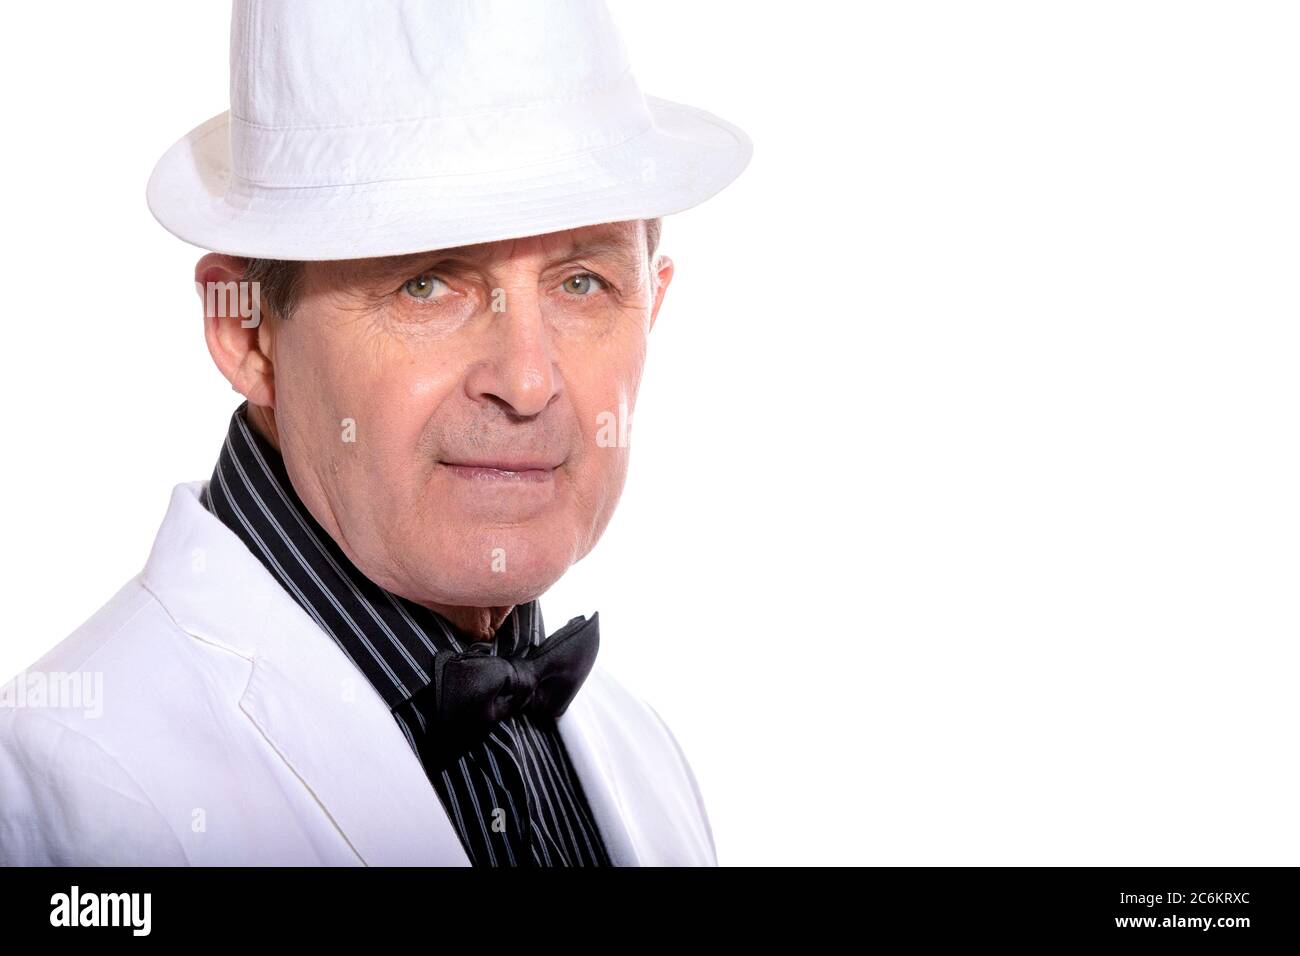 Attractive elderly man dressed in white with hat and elegant style Stock Photo